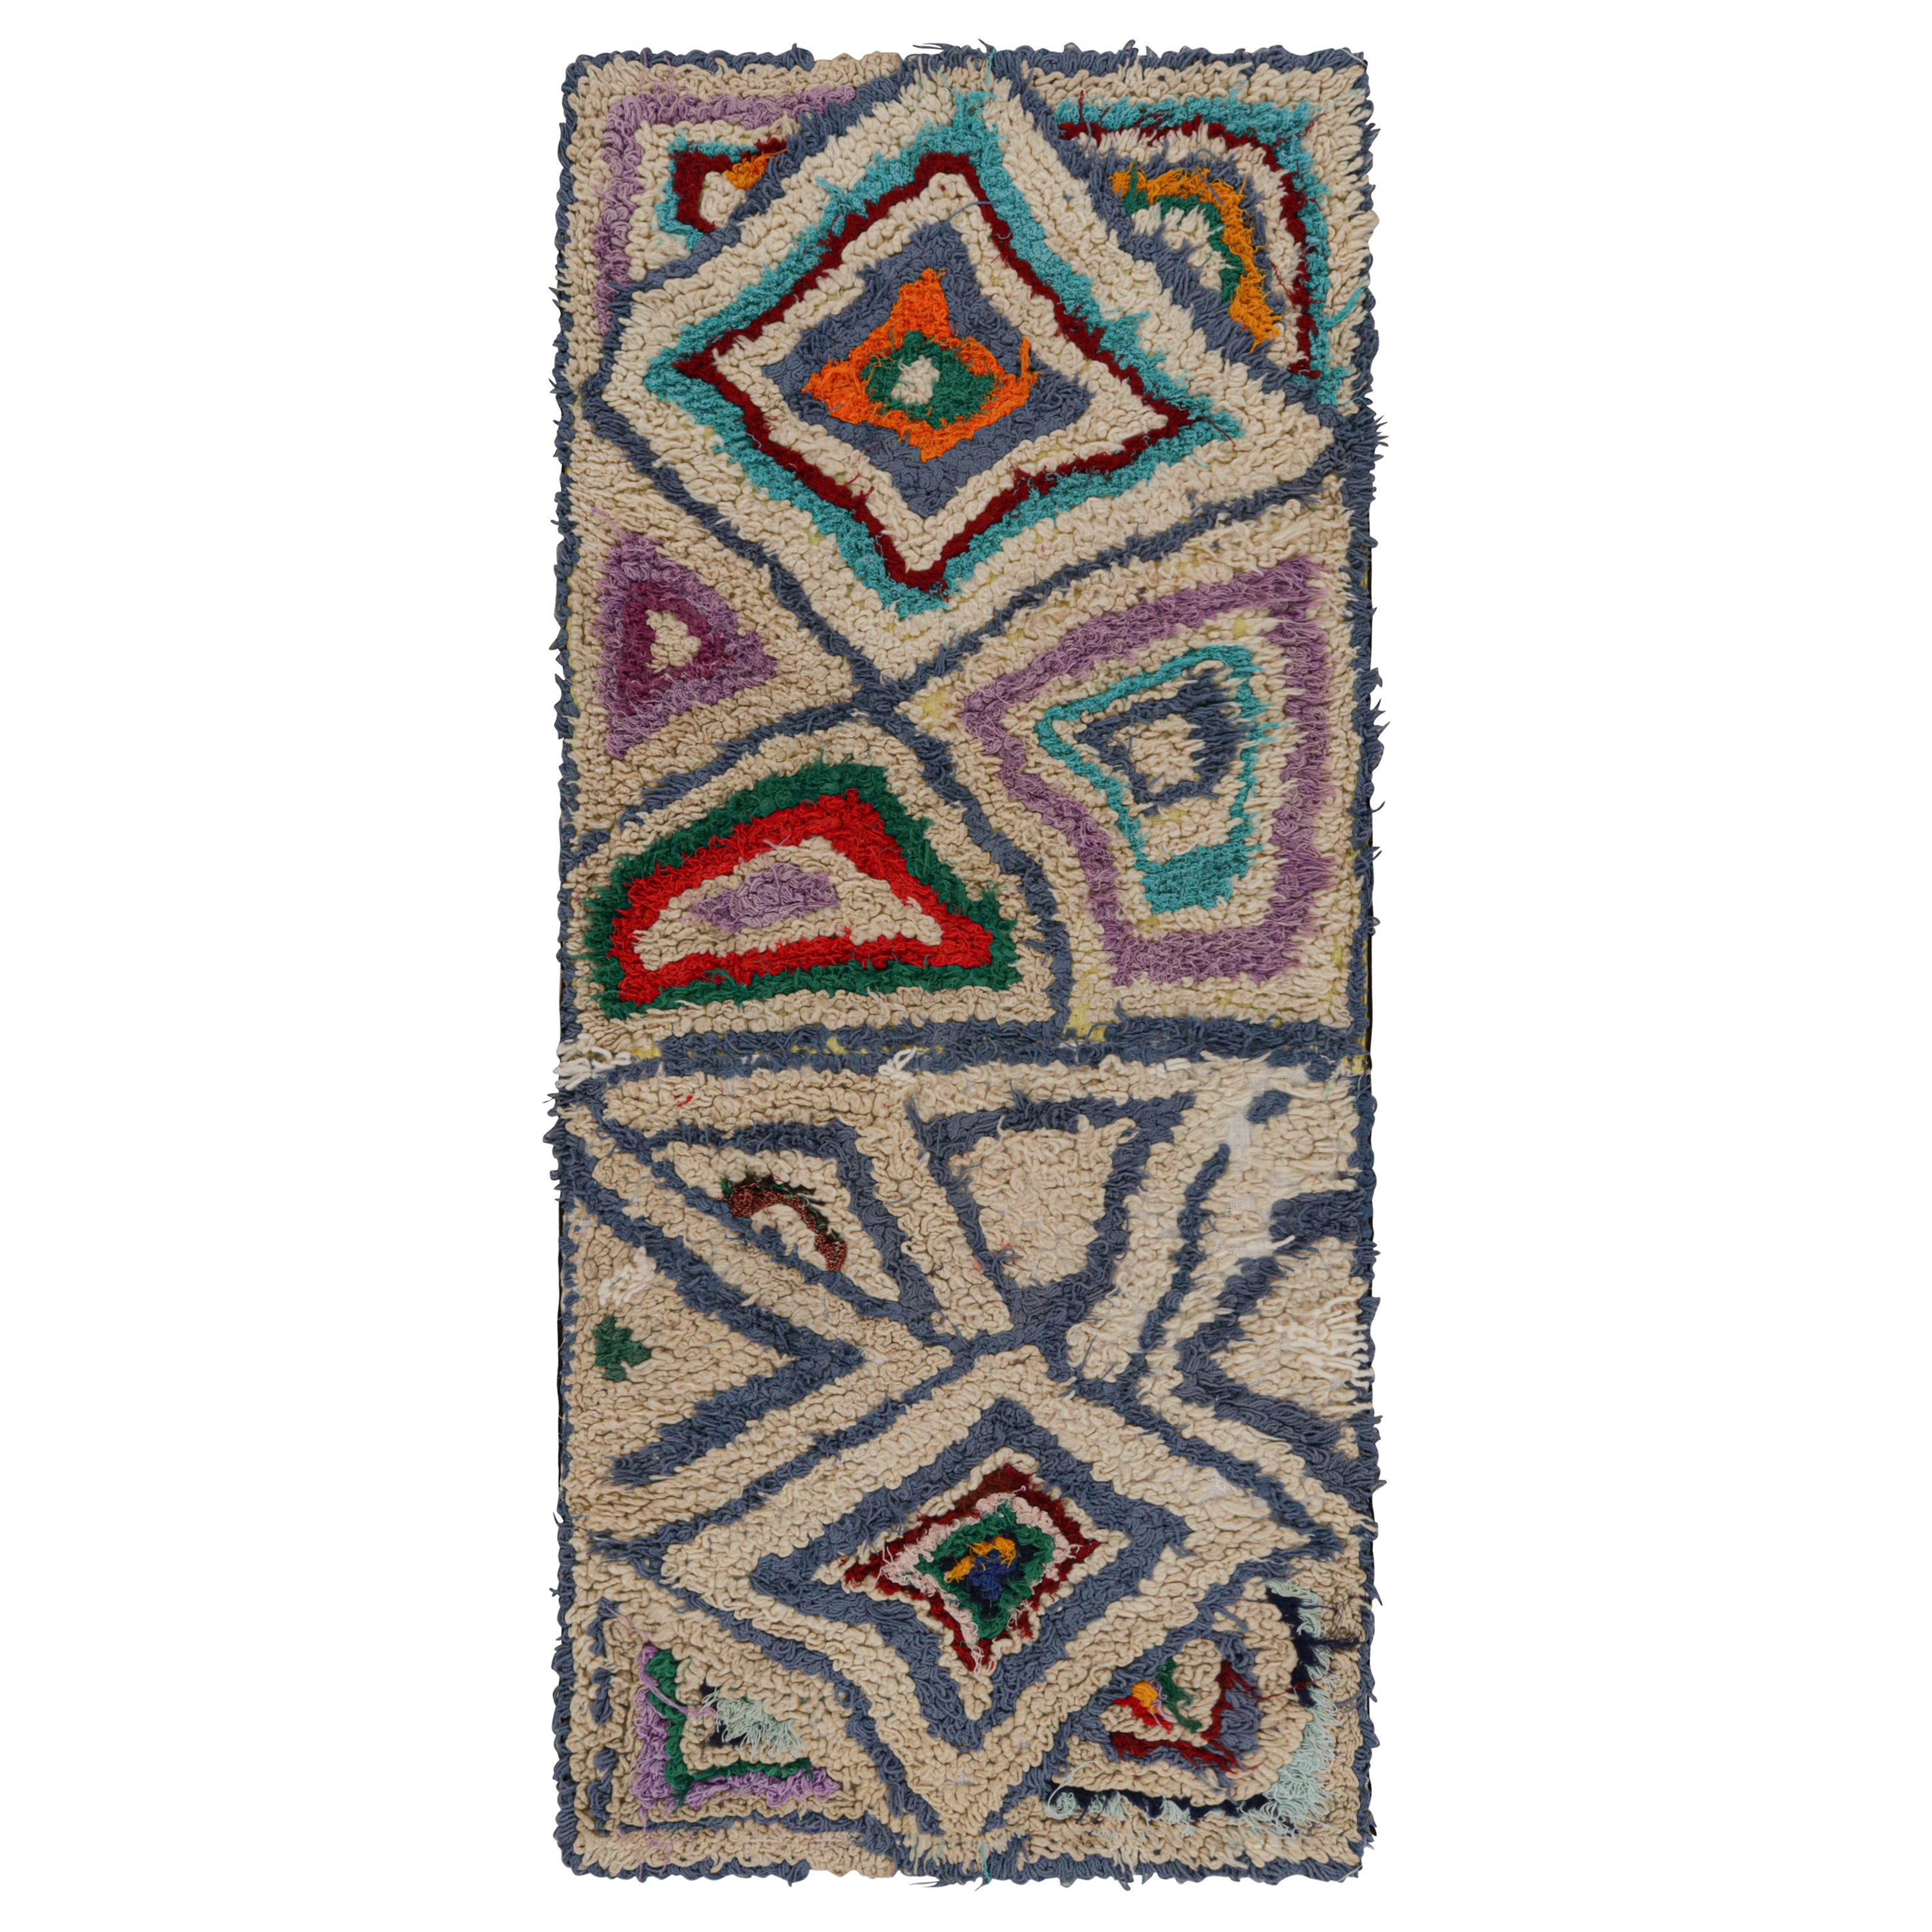 Vintage Moroccan Runner Rug with Geometric Patterns, from Rug & Kilim 